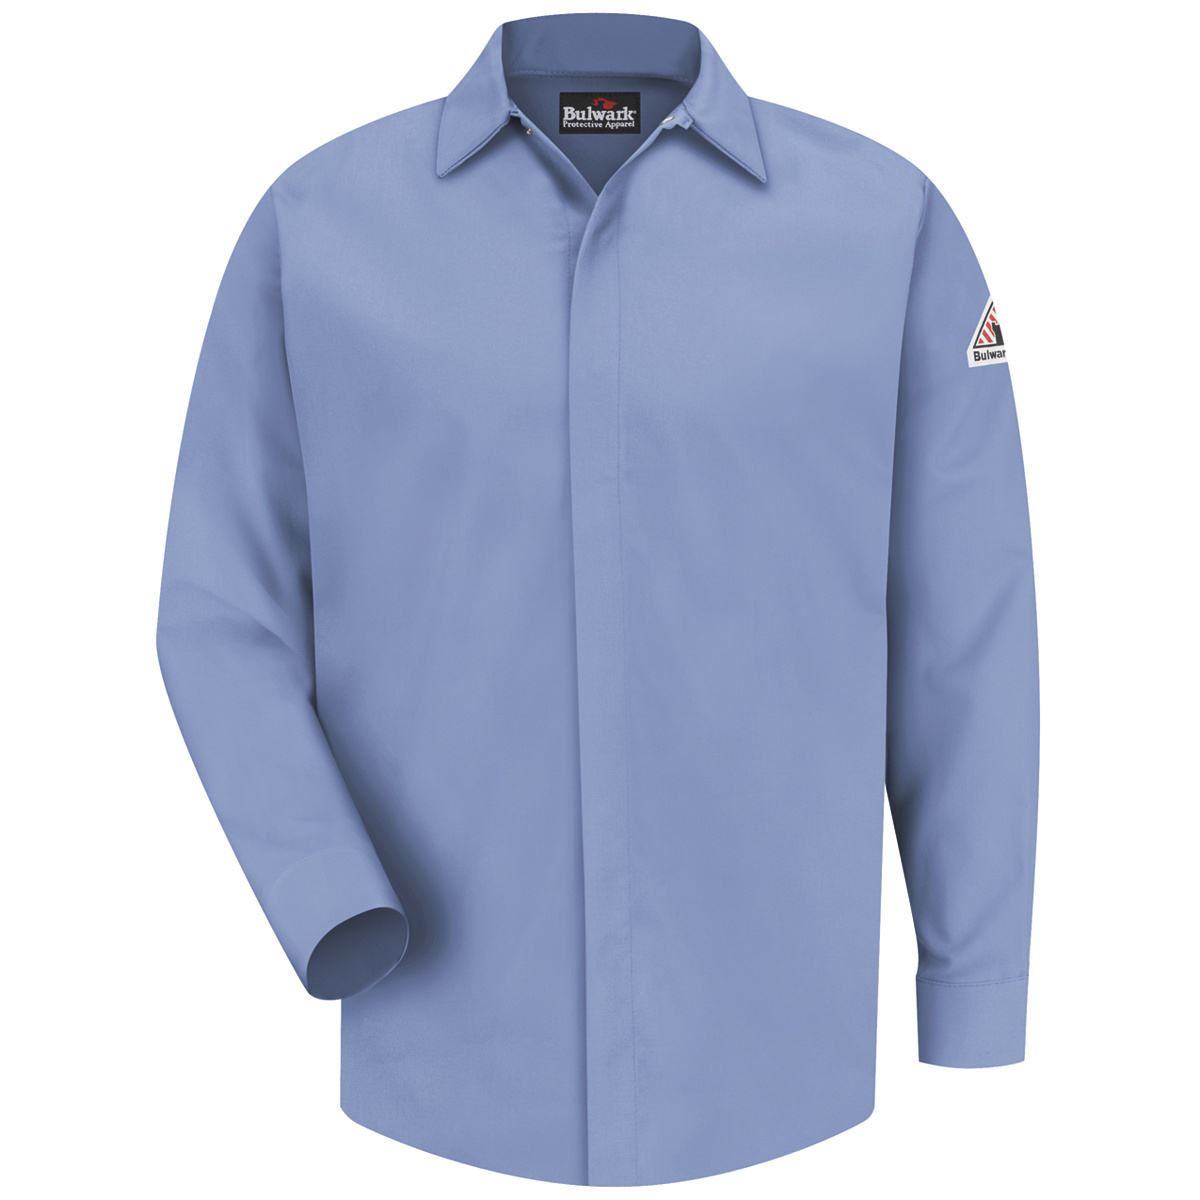 Bulwark® 3X Tall Light Blue Westex Ultrasoft®/Cotton/Nylon Flame Resistant Work Shirt With Gripper Front Closure